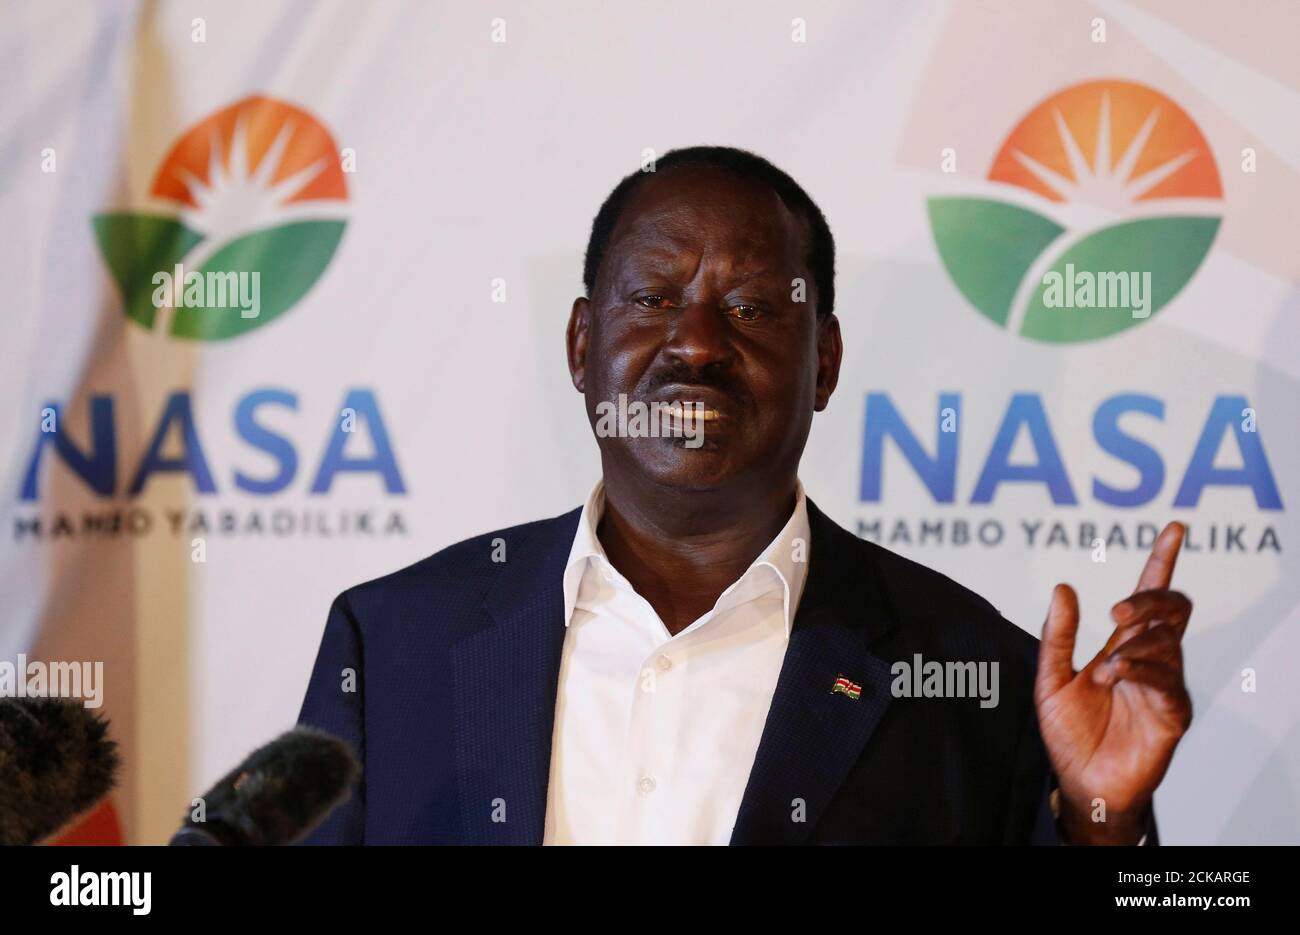 Kenyan opposition leader Raila Odinga, the presidential candidate of the National Super Alliance (NASA) coalition, address a news conference on the concluded presidential election in Nairobi, Kenya, August 9, 2017. REUTERS/Thomas Mukoya Stock Photo